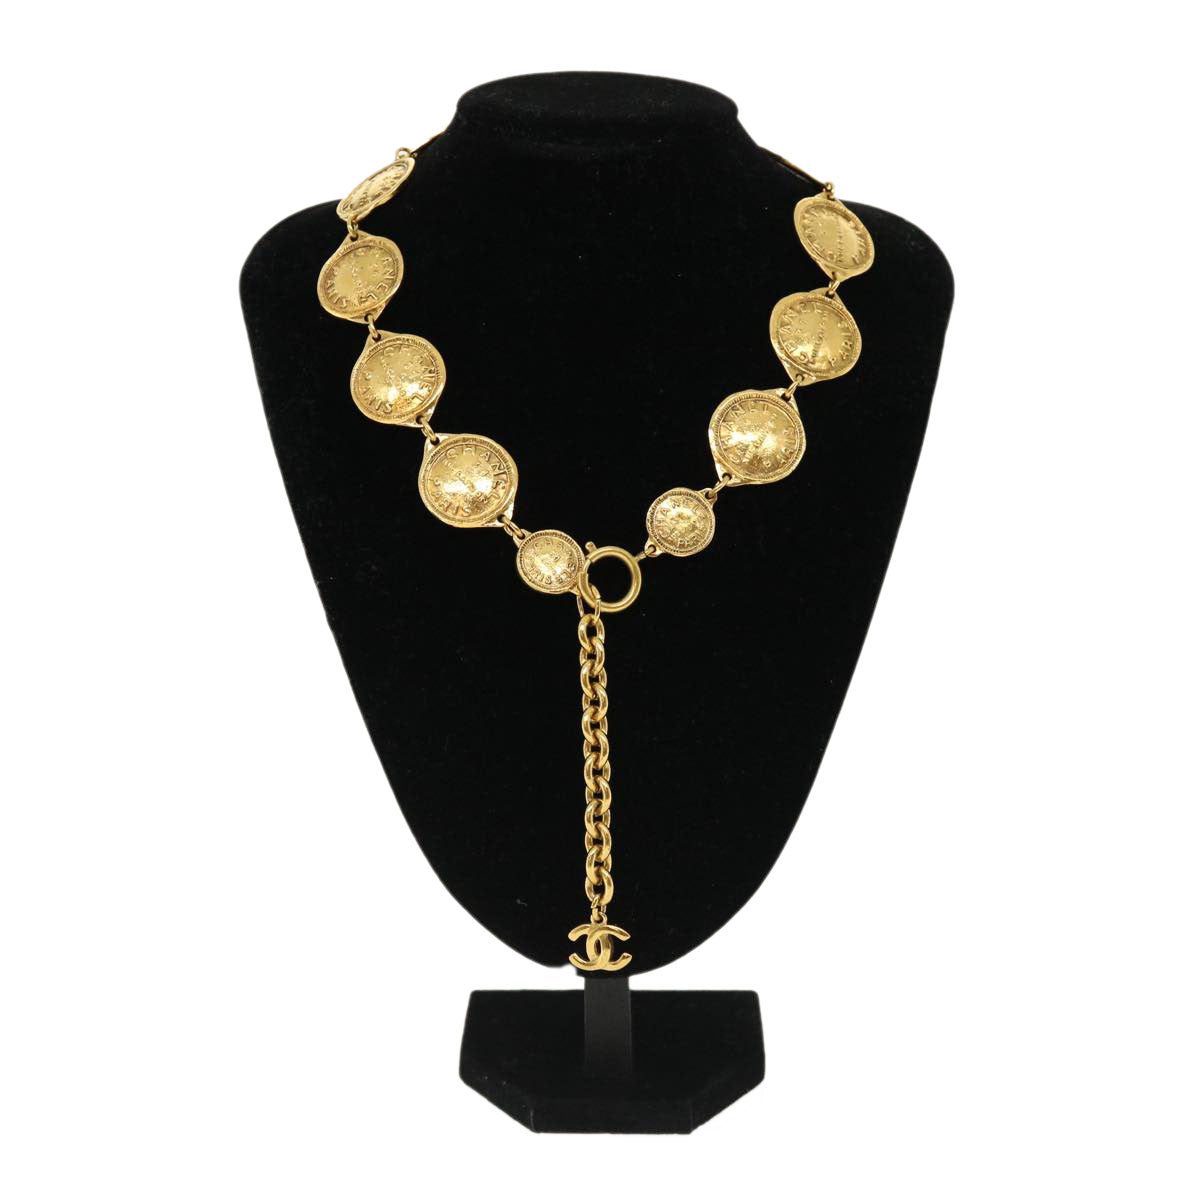 CHANEL Necklace metal Gold CC Auth ar7677